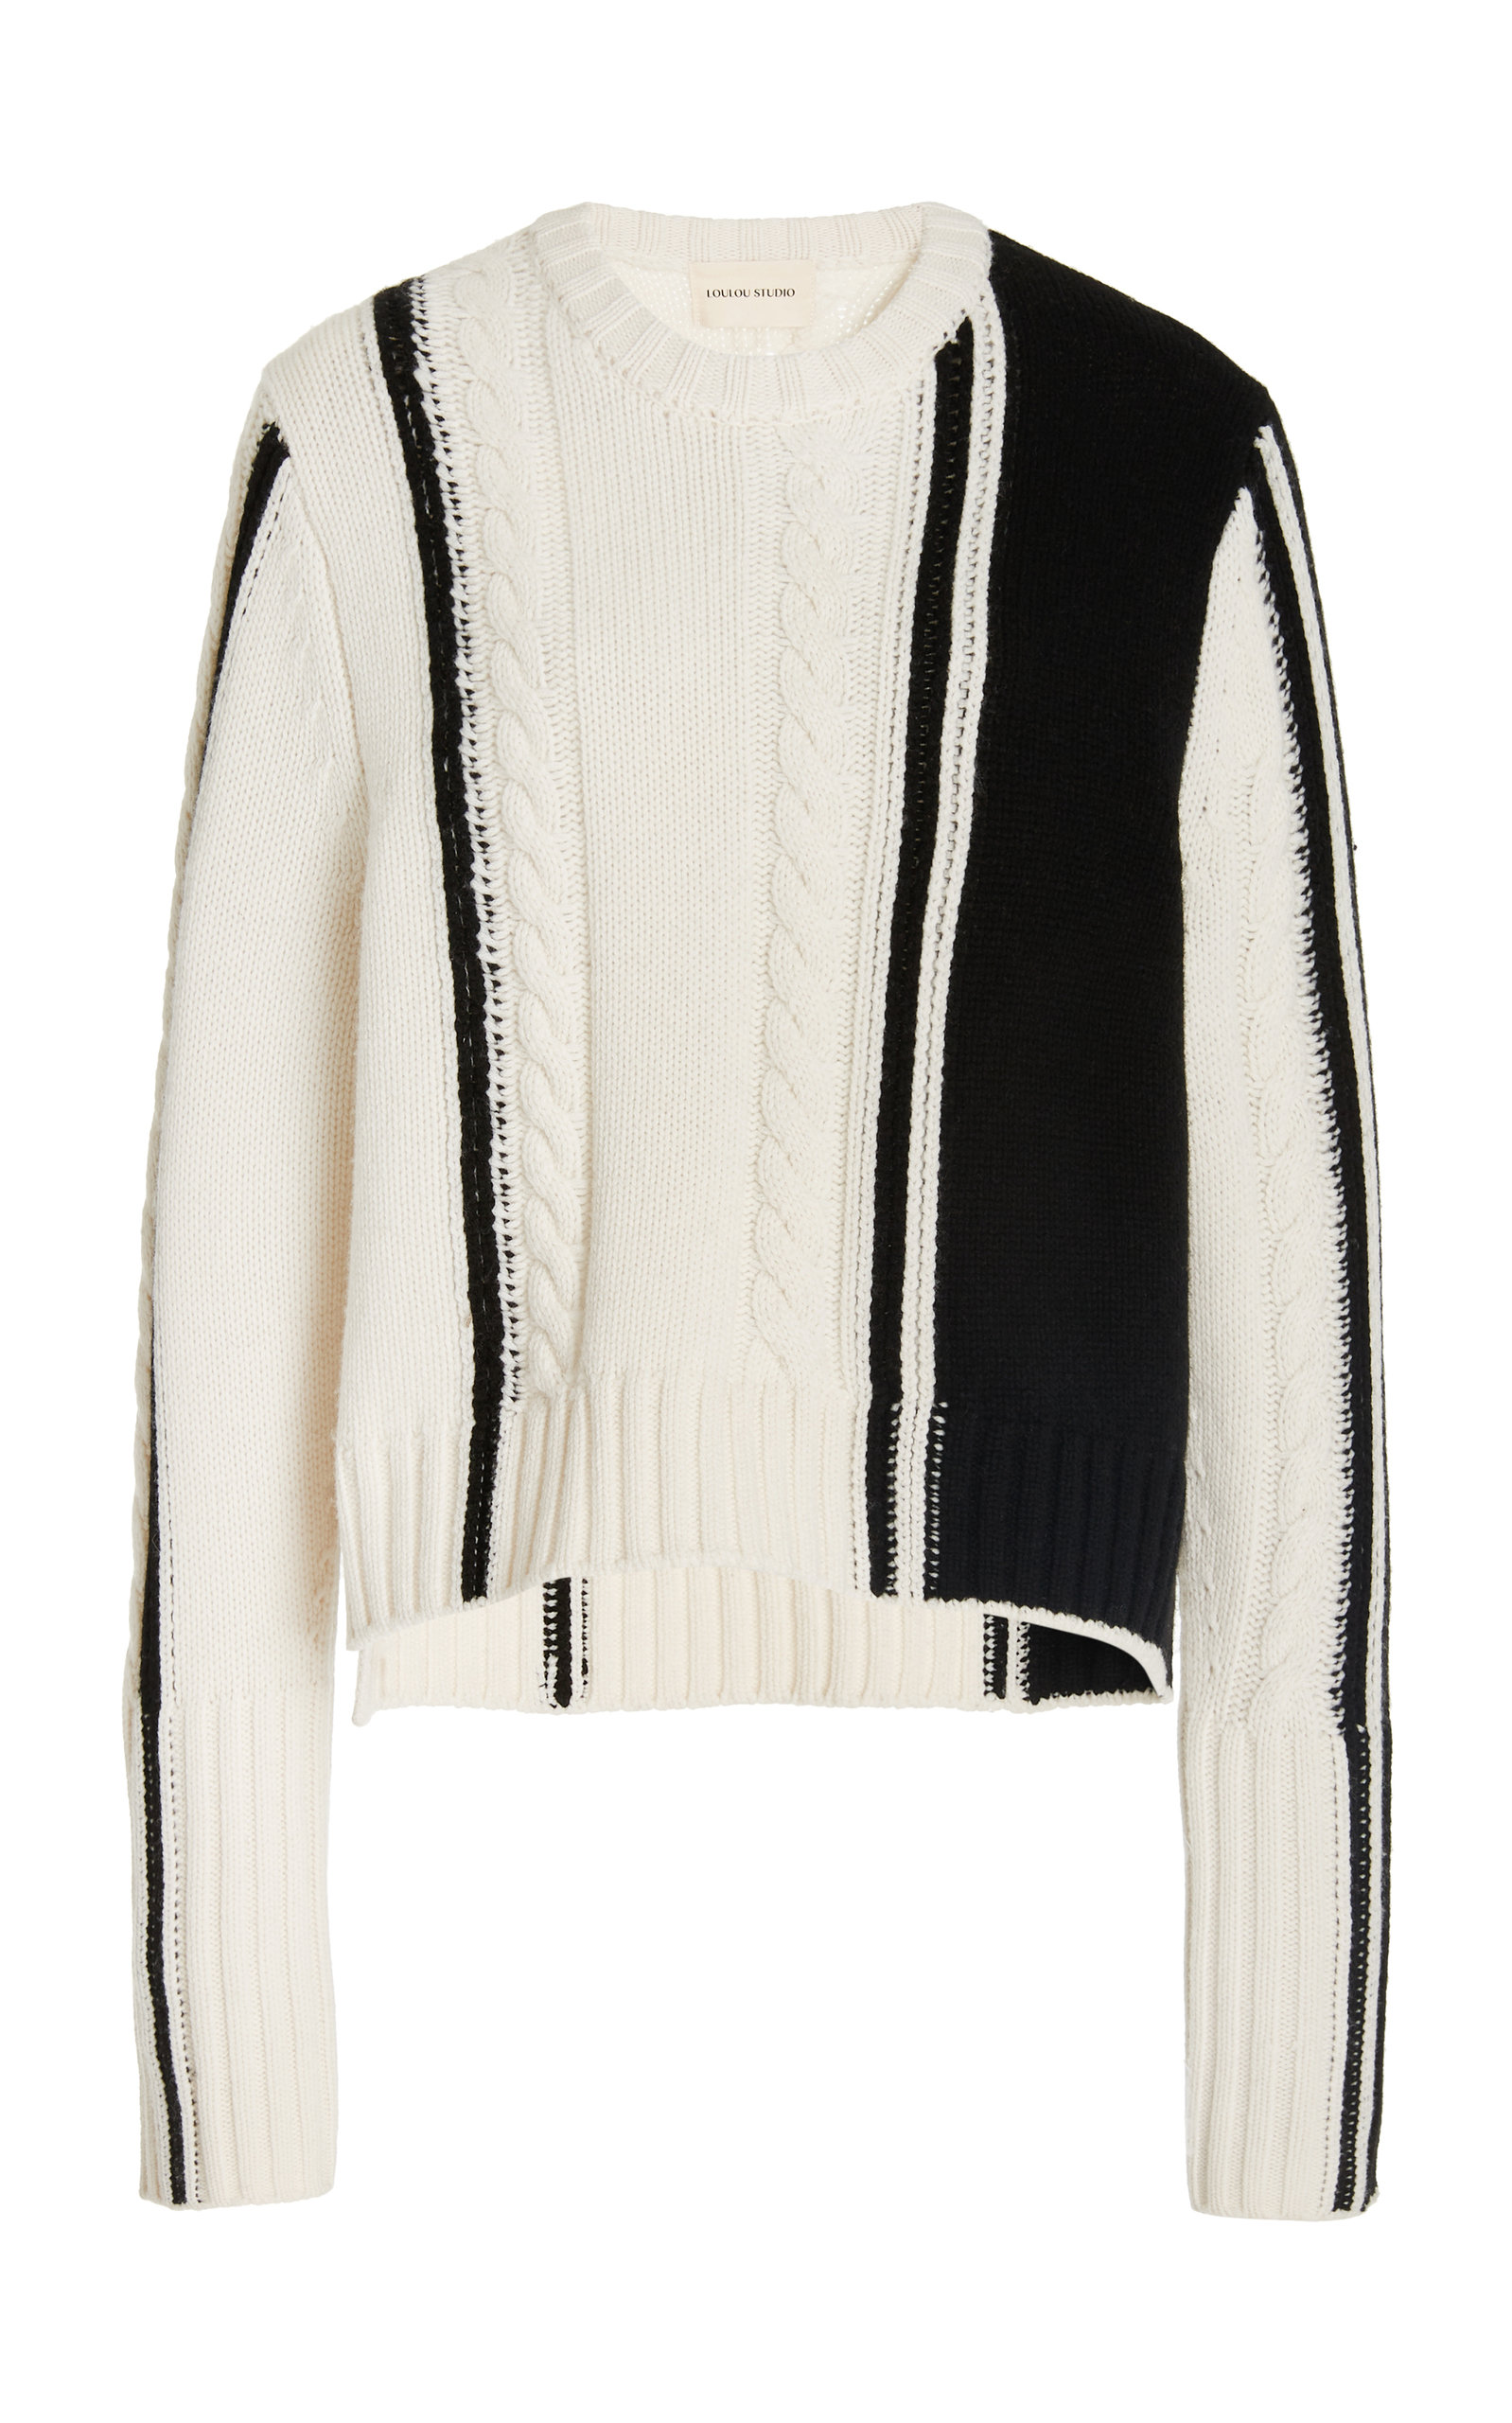 Loulou Studio Women's Cable Knit Wool and Cashmere Sweater